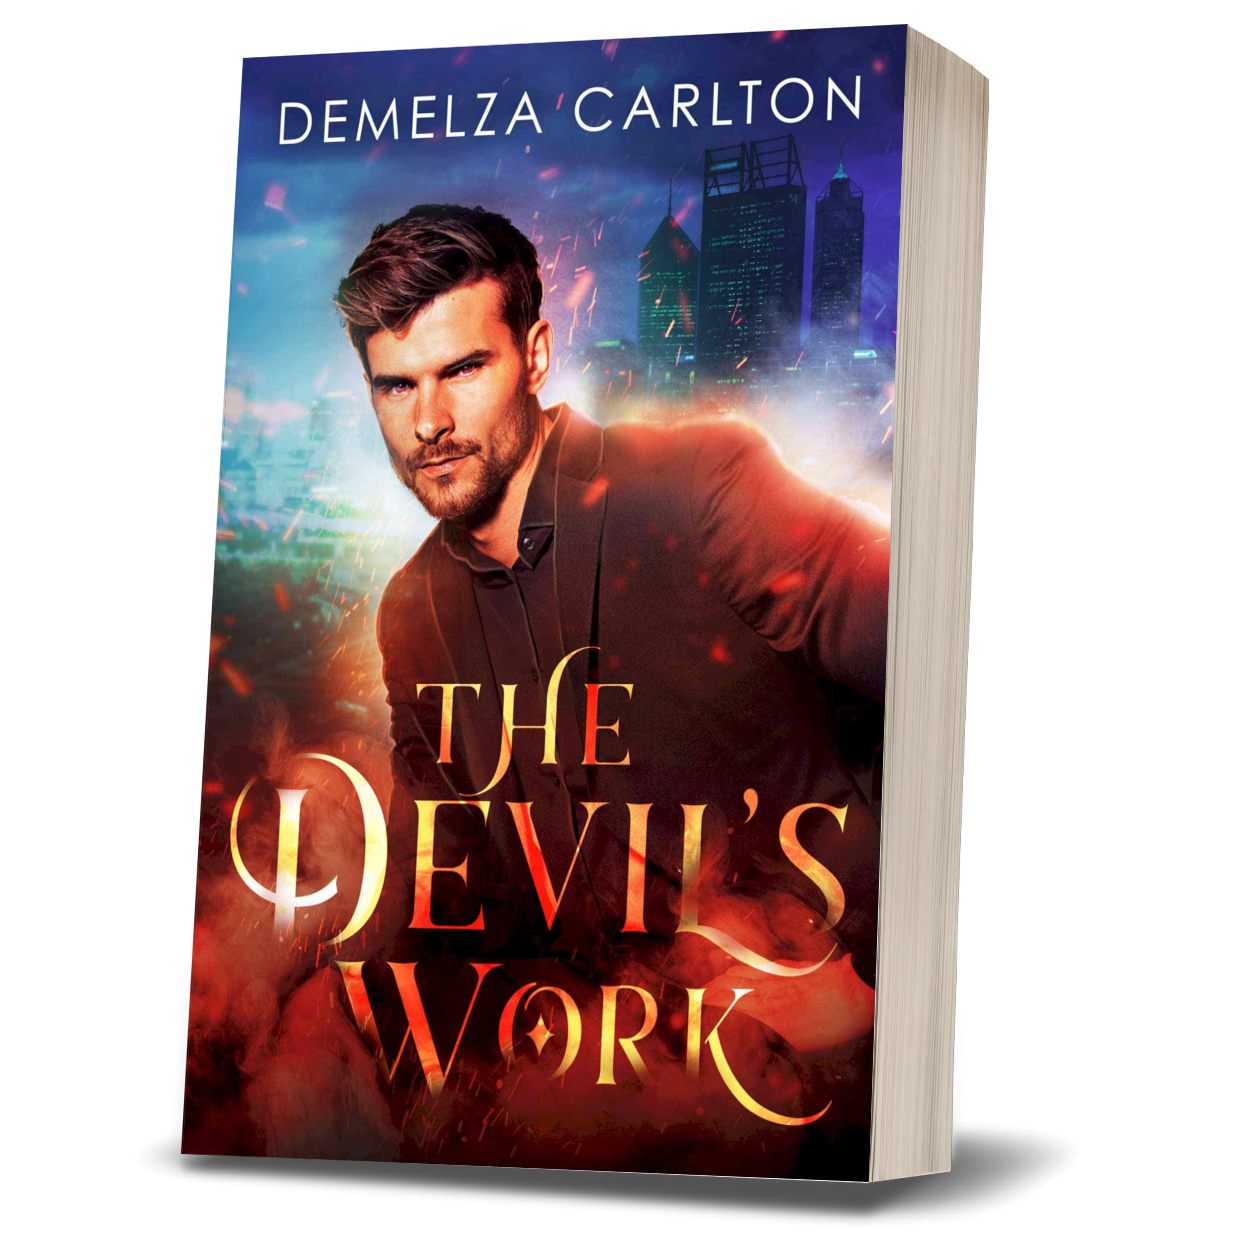 A steamy paranormal romance tale of angels and demons for fans of Good Omens, Lucifer, Supernatural and Charmed.